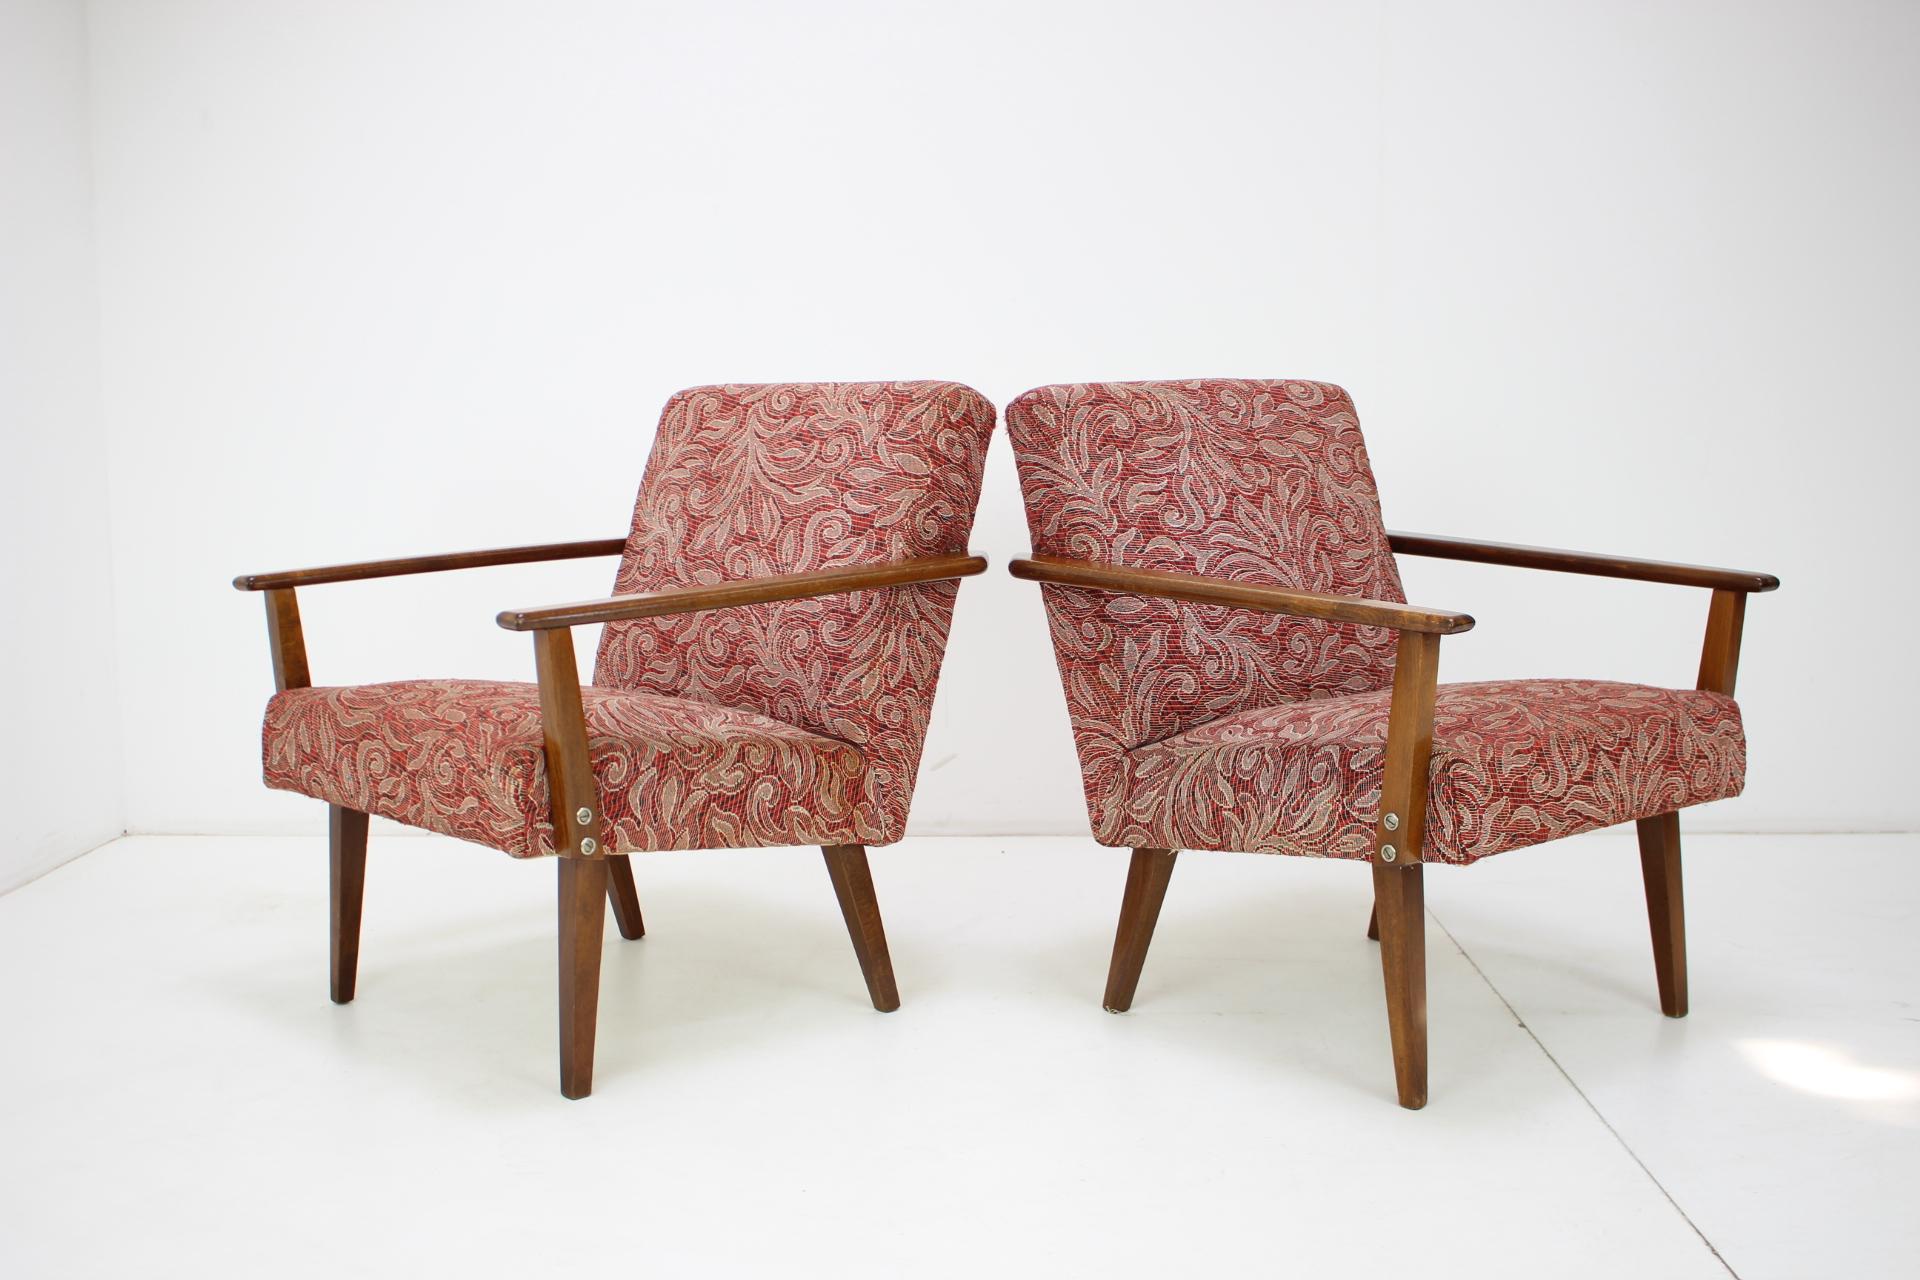 - made in Czechoslovakia
- made of wood, fabric
- upholstery has some signs use
- good, original condition.